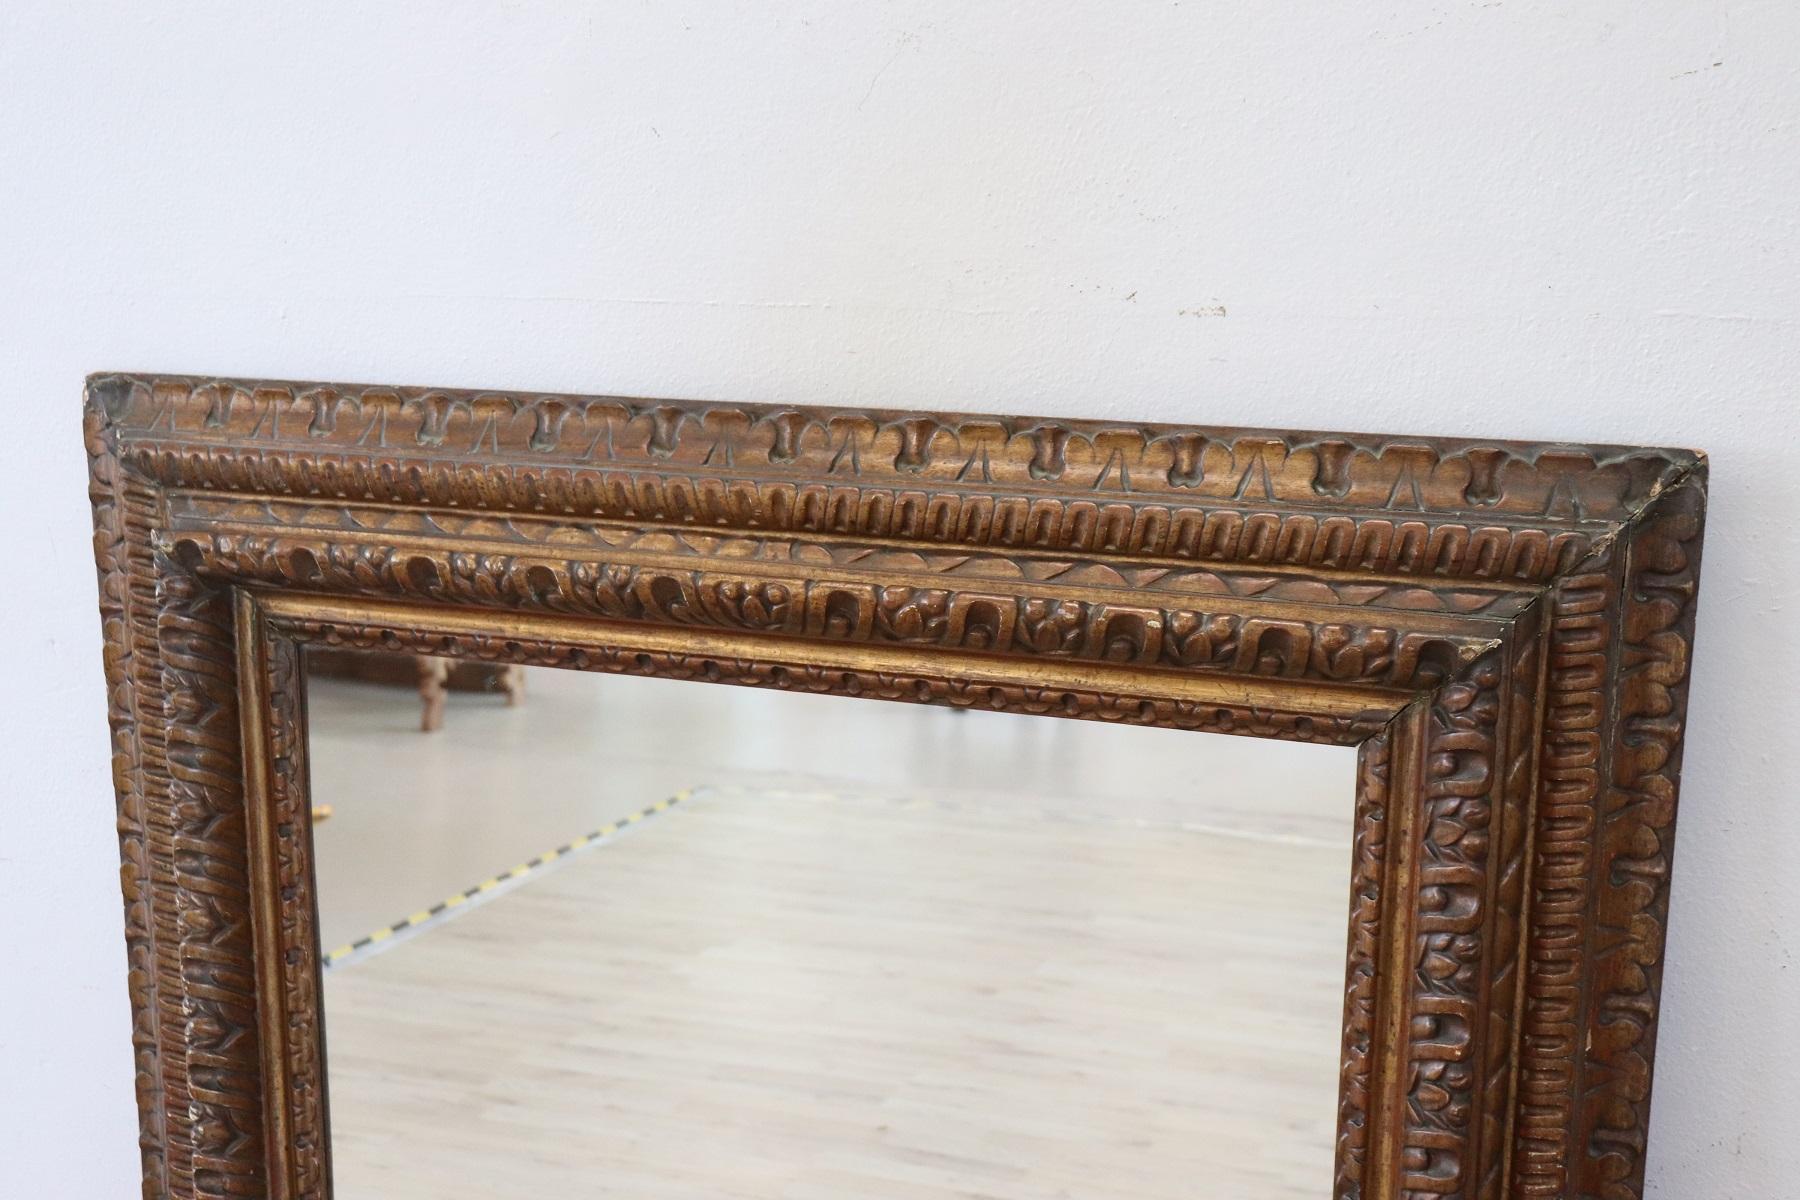 Impressive rare large wall mirror in perfect Italian Renaissance style. Made in finely carved walnut wood. High quality cabinet-making to watch wood carving with numerous curls and volutes. The color is a patinated gold similar to bronze. Mirror of